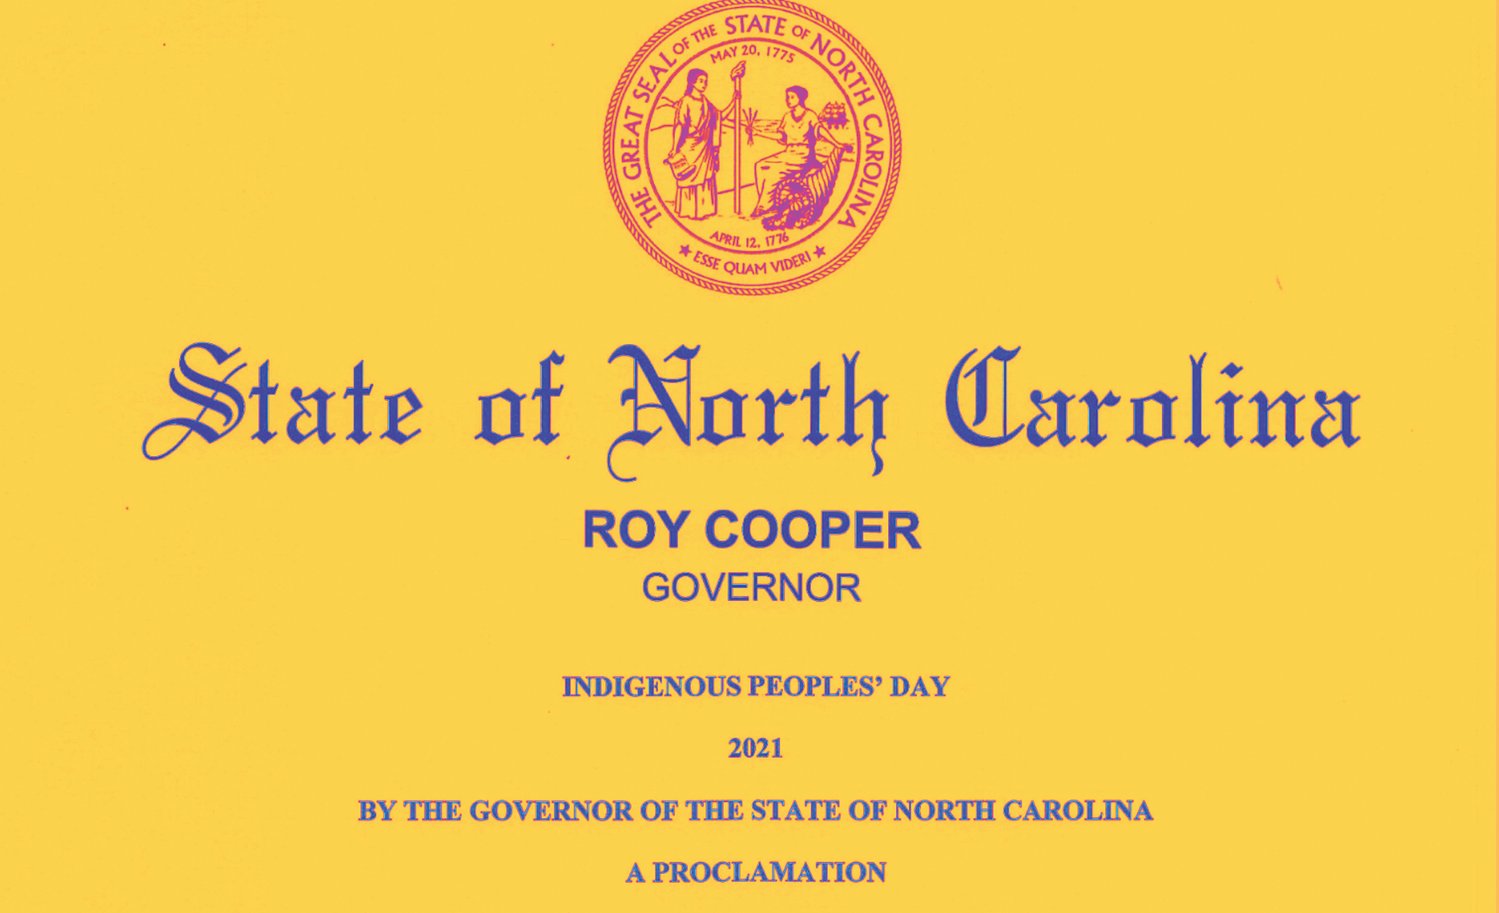 North Carolina Gov. Roy Cooper proclaimed Oct. 10 as Indigenous Peoples’ Day.